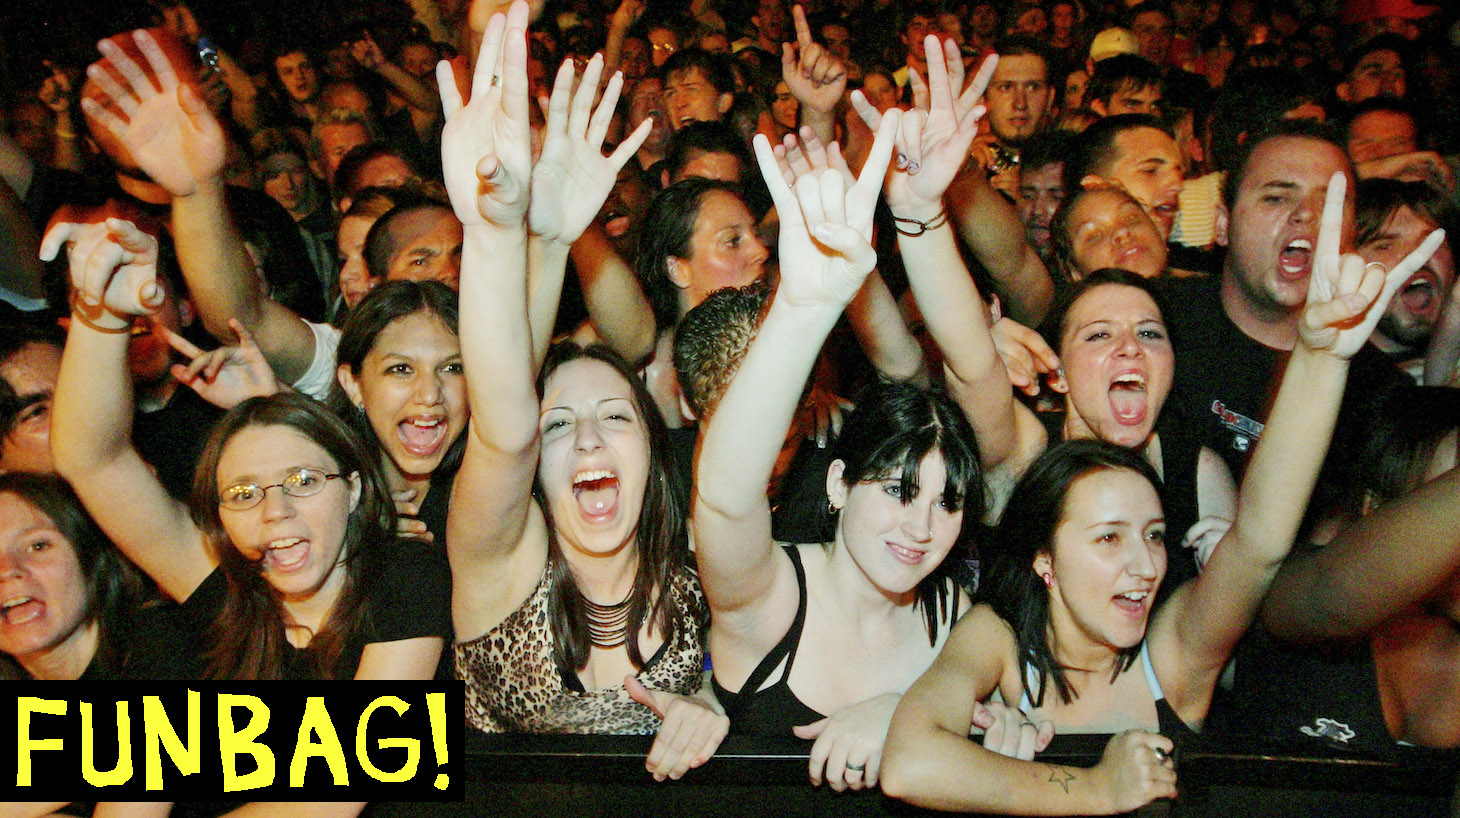 LAS VEGAS - AUGUST 05: Fans react as Papa Roach performs at The Joint inside the Hard Rock Hotel &amp; Casino August 5, 2005 in Las Vegas, Nevada. The rock group is touring in support of the platinum-selling album "Getting Away With Murder." (Photo by Ethan Miller/Getty Images)